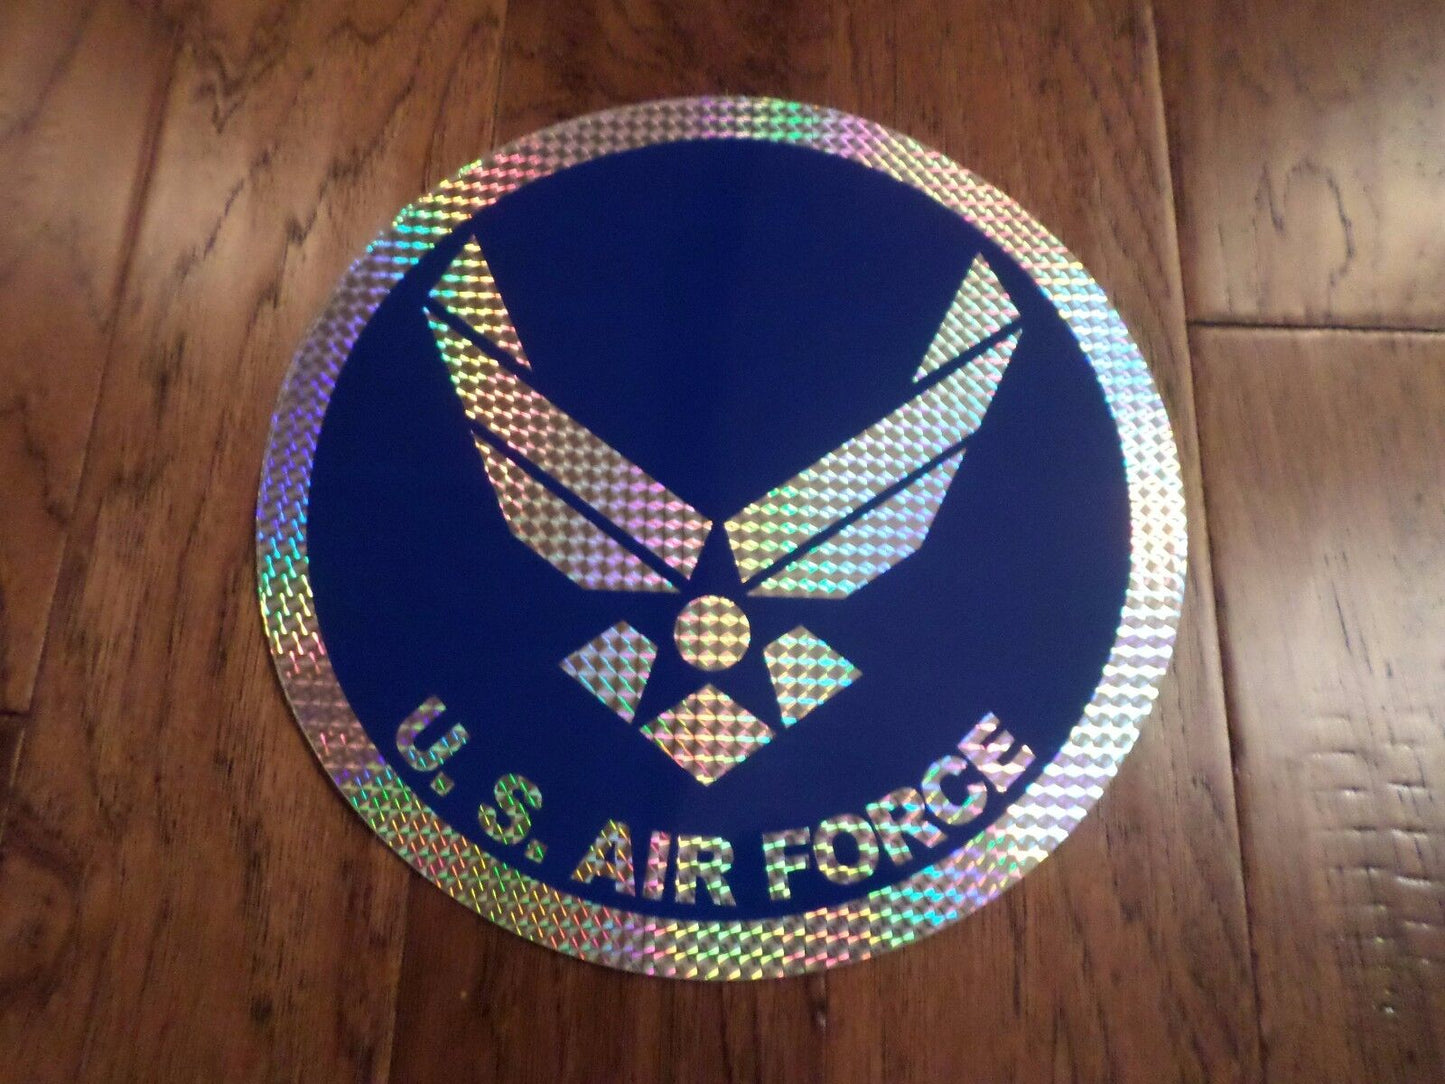 U.S MILITARY AIR FORCE LARGE OVERSIZED PRISM WINDOW DECAL STICKER 12" INCHES